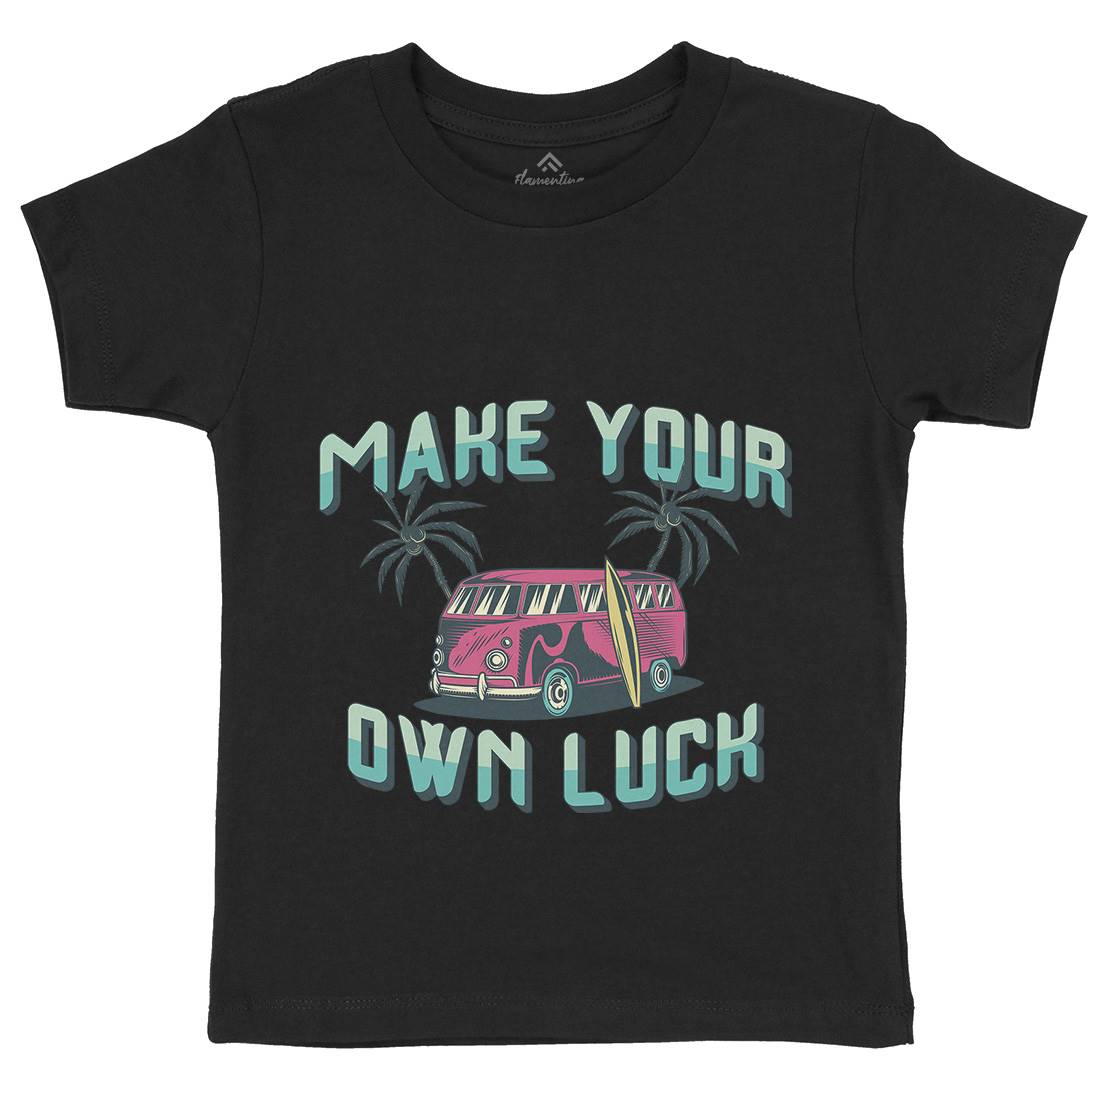 Make Your Own Luck Kids Crew Neck T-Shirt Nature B307